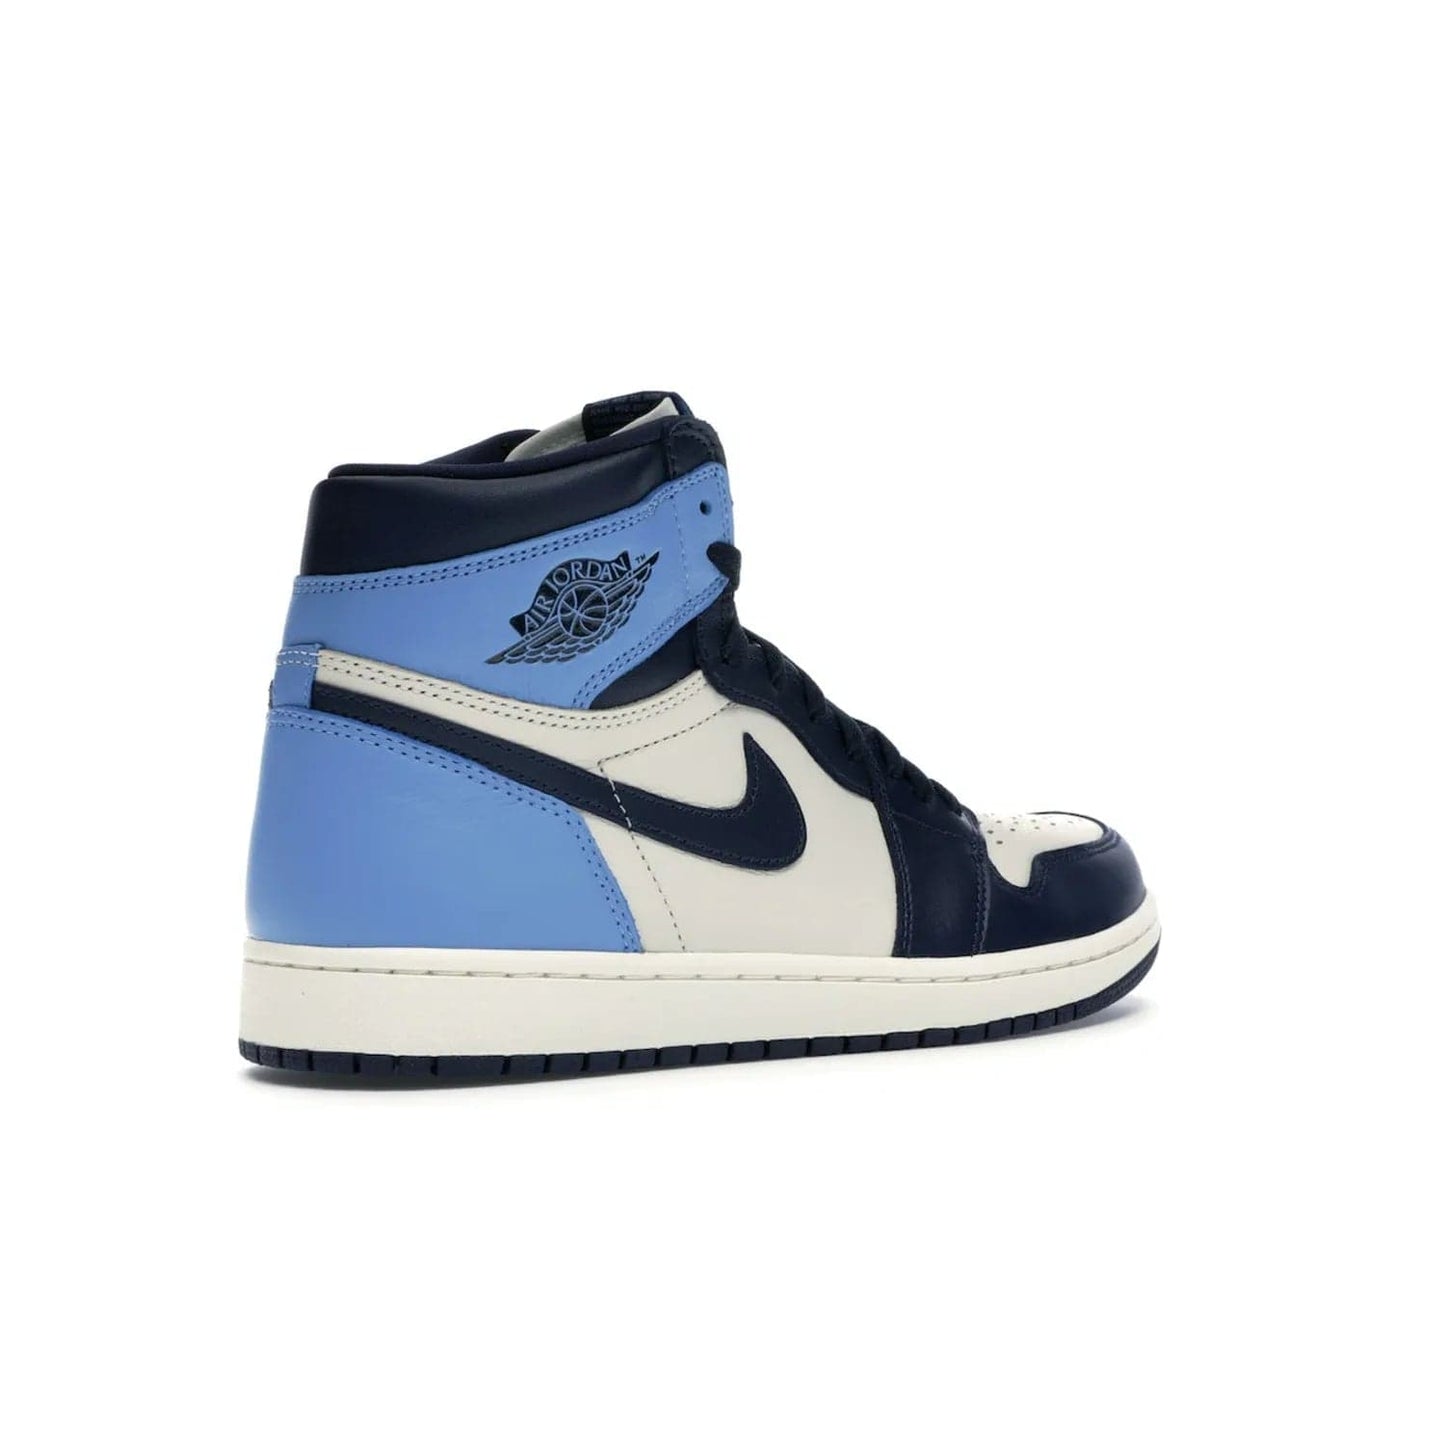 Jordan 1 Retro High Obsidian UNC - Image 33 - Only at www.BallersClubKickz.com - Bring a timeless classic to your wardrobe with the Air Jordan 1 Retro High "Obsidian/University Blue”. A full leather upper combines Obsidian and University Blue detailing for a retro Jordan style. Stitched Jumpman logo pays tribute to UNC. Experience classic style with a timeless sneaker.